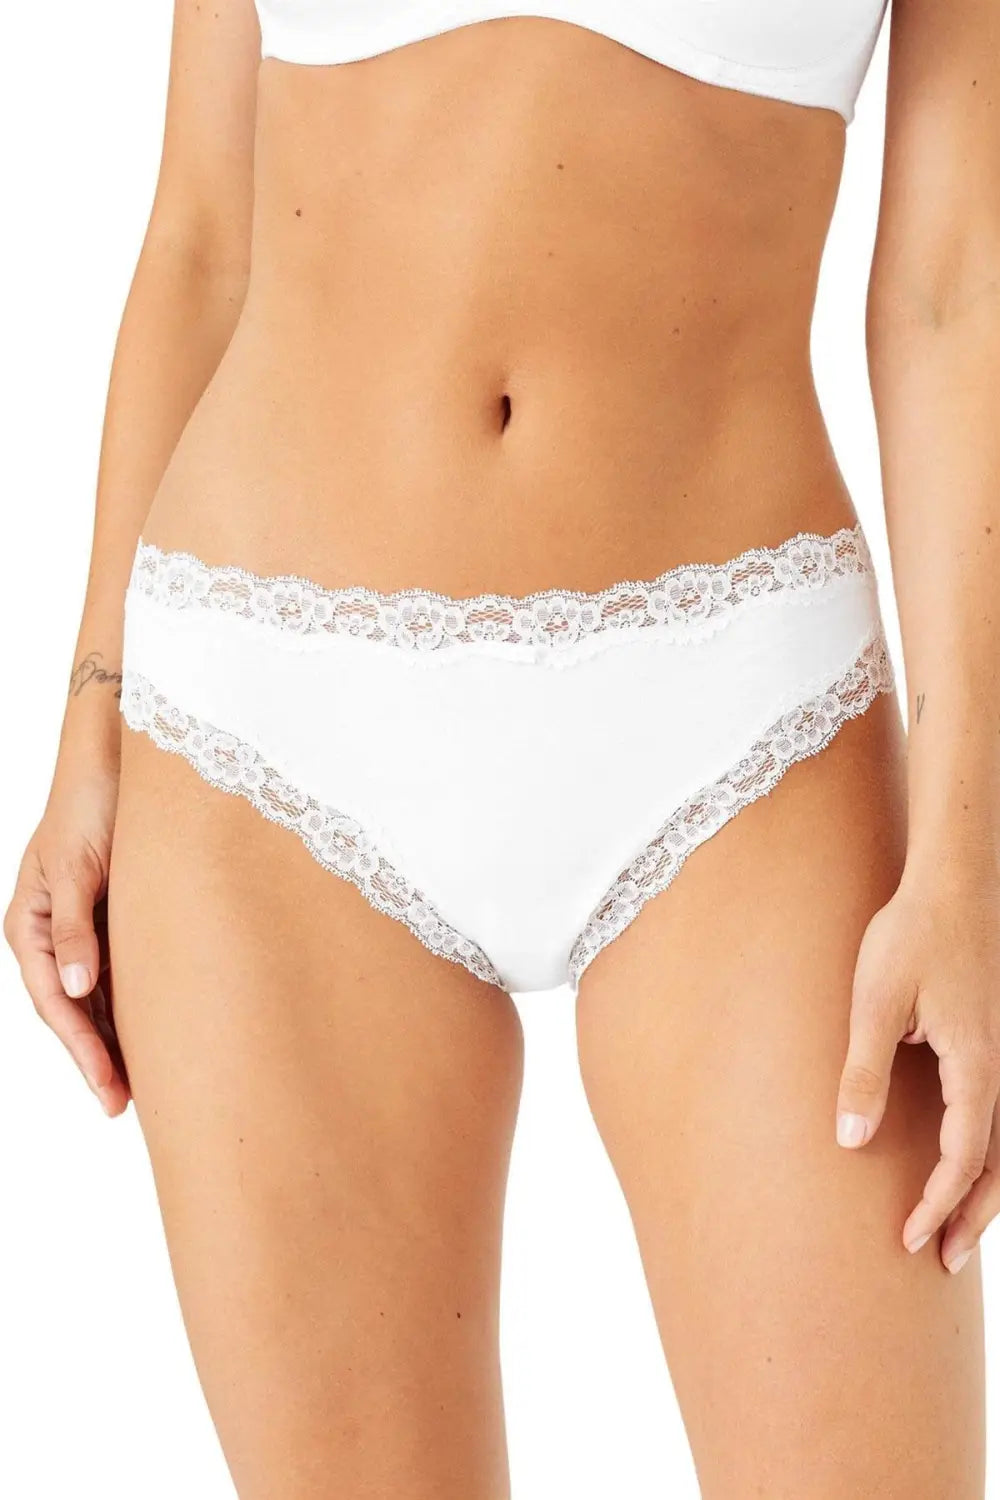 Lace Knickers Black White (4 Pack)